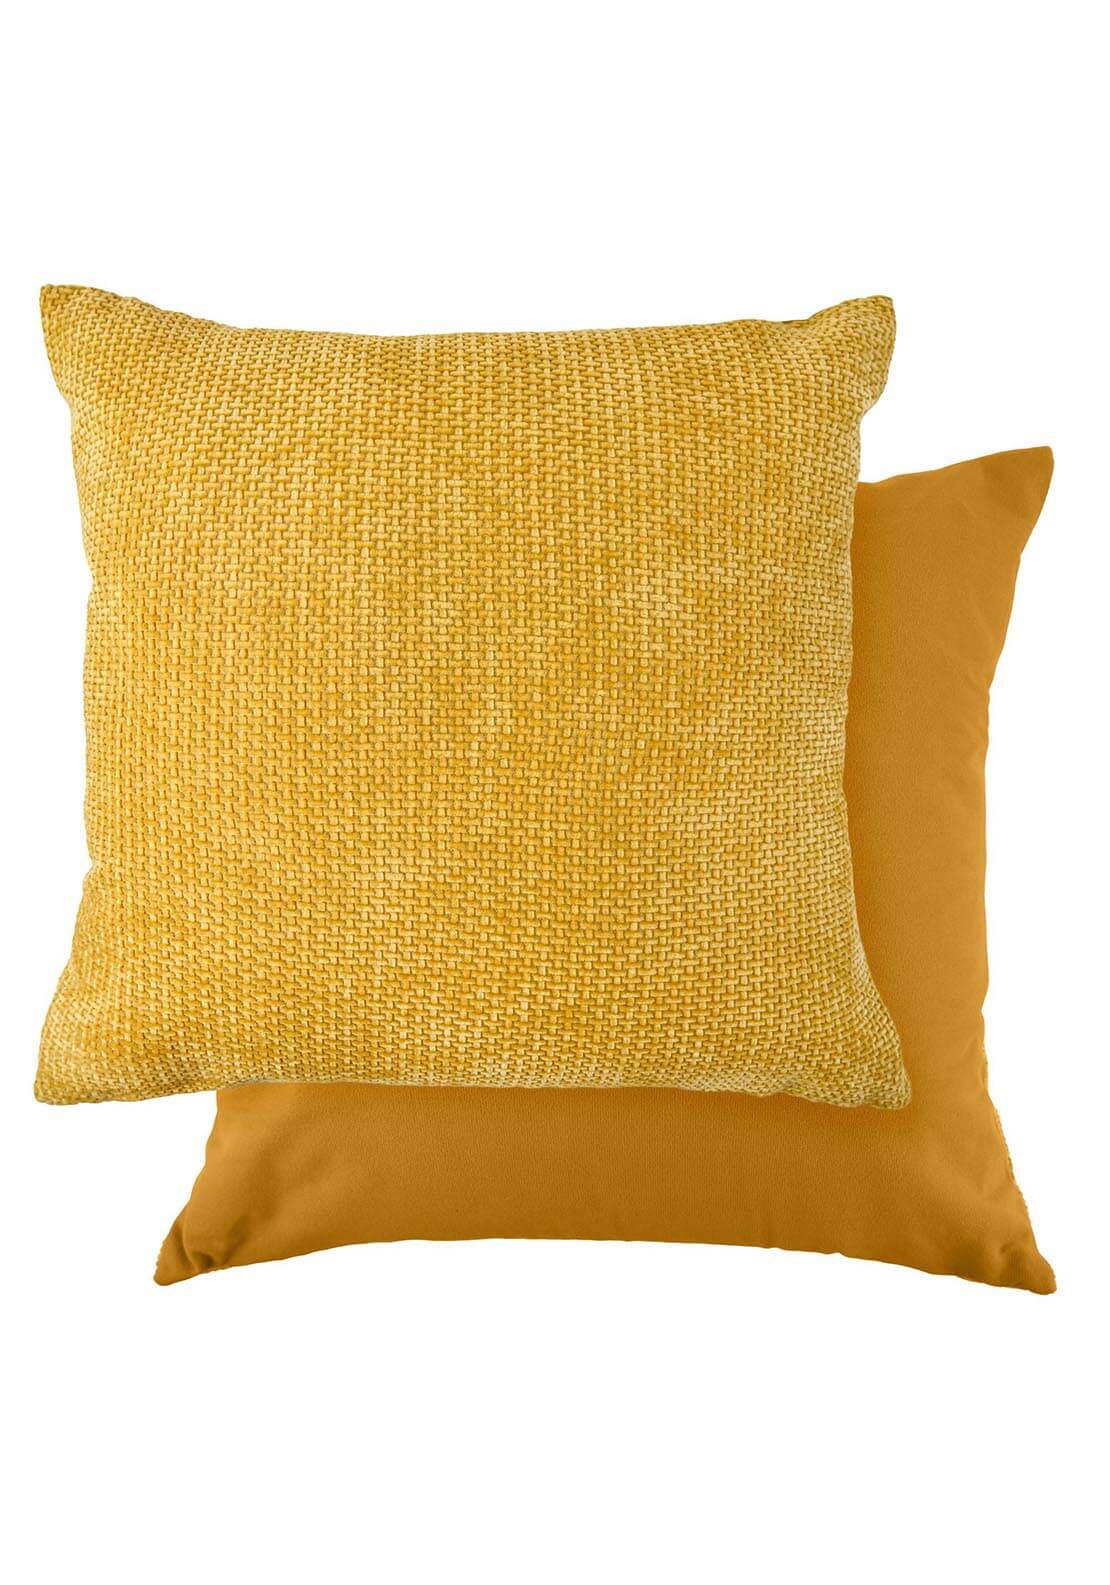 The Home Collection Portland Cushion 17&quot; x 17&quot; - Ochre 2 Shaws Department Stores